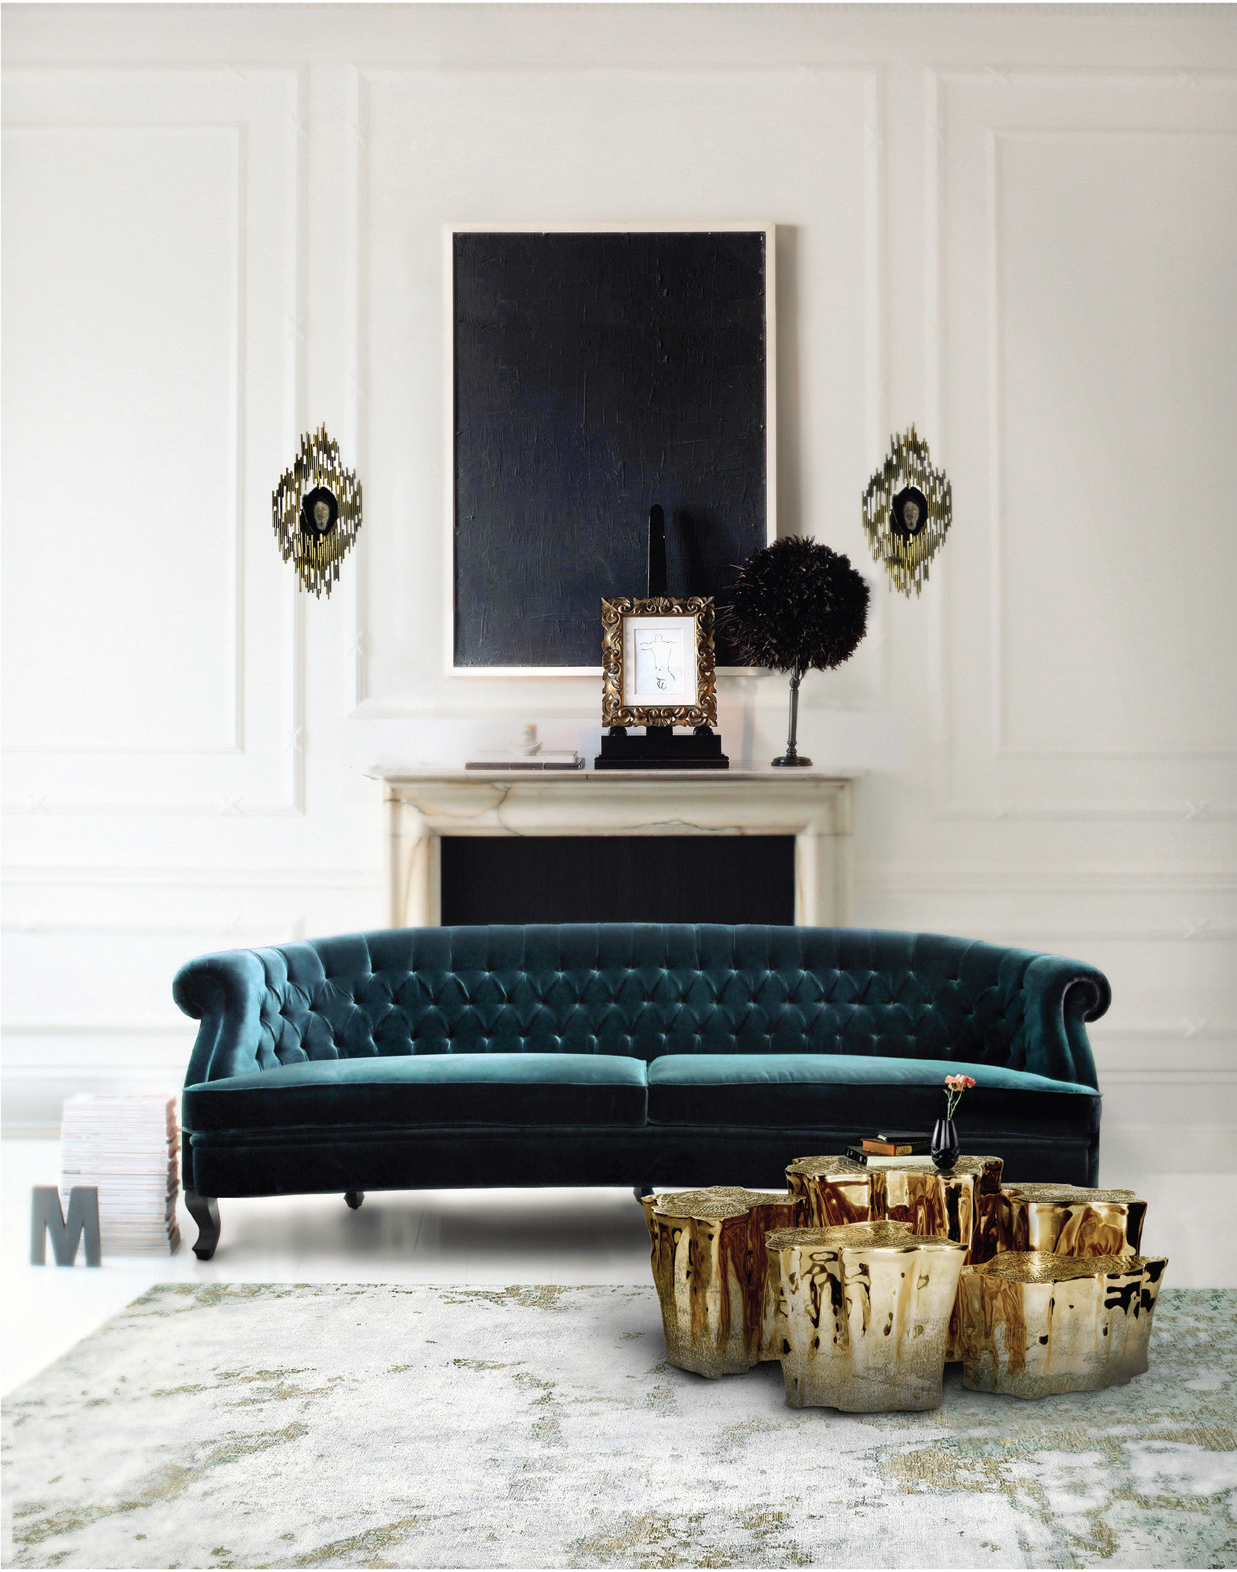 DESIGN INSPIRATION FOR THE LUXURIOUS MODERN CLASSIC LIVING ROOM